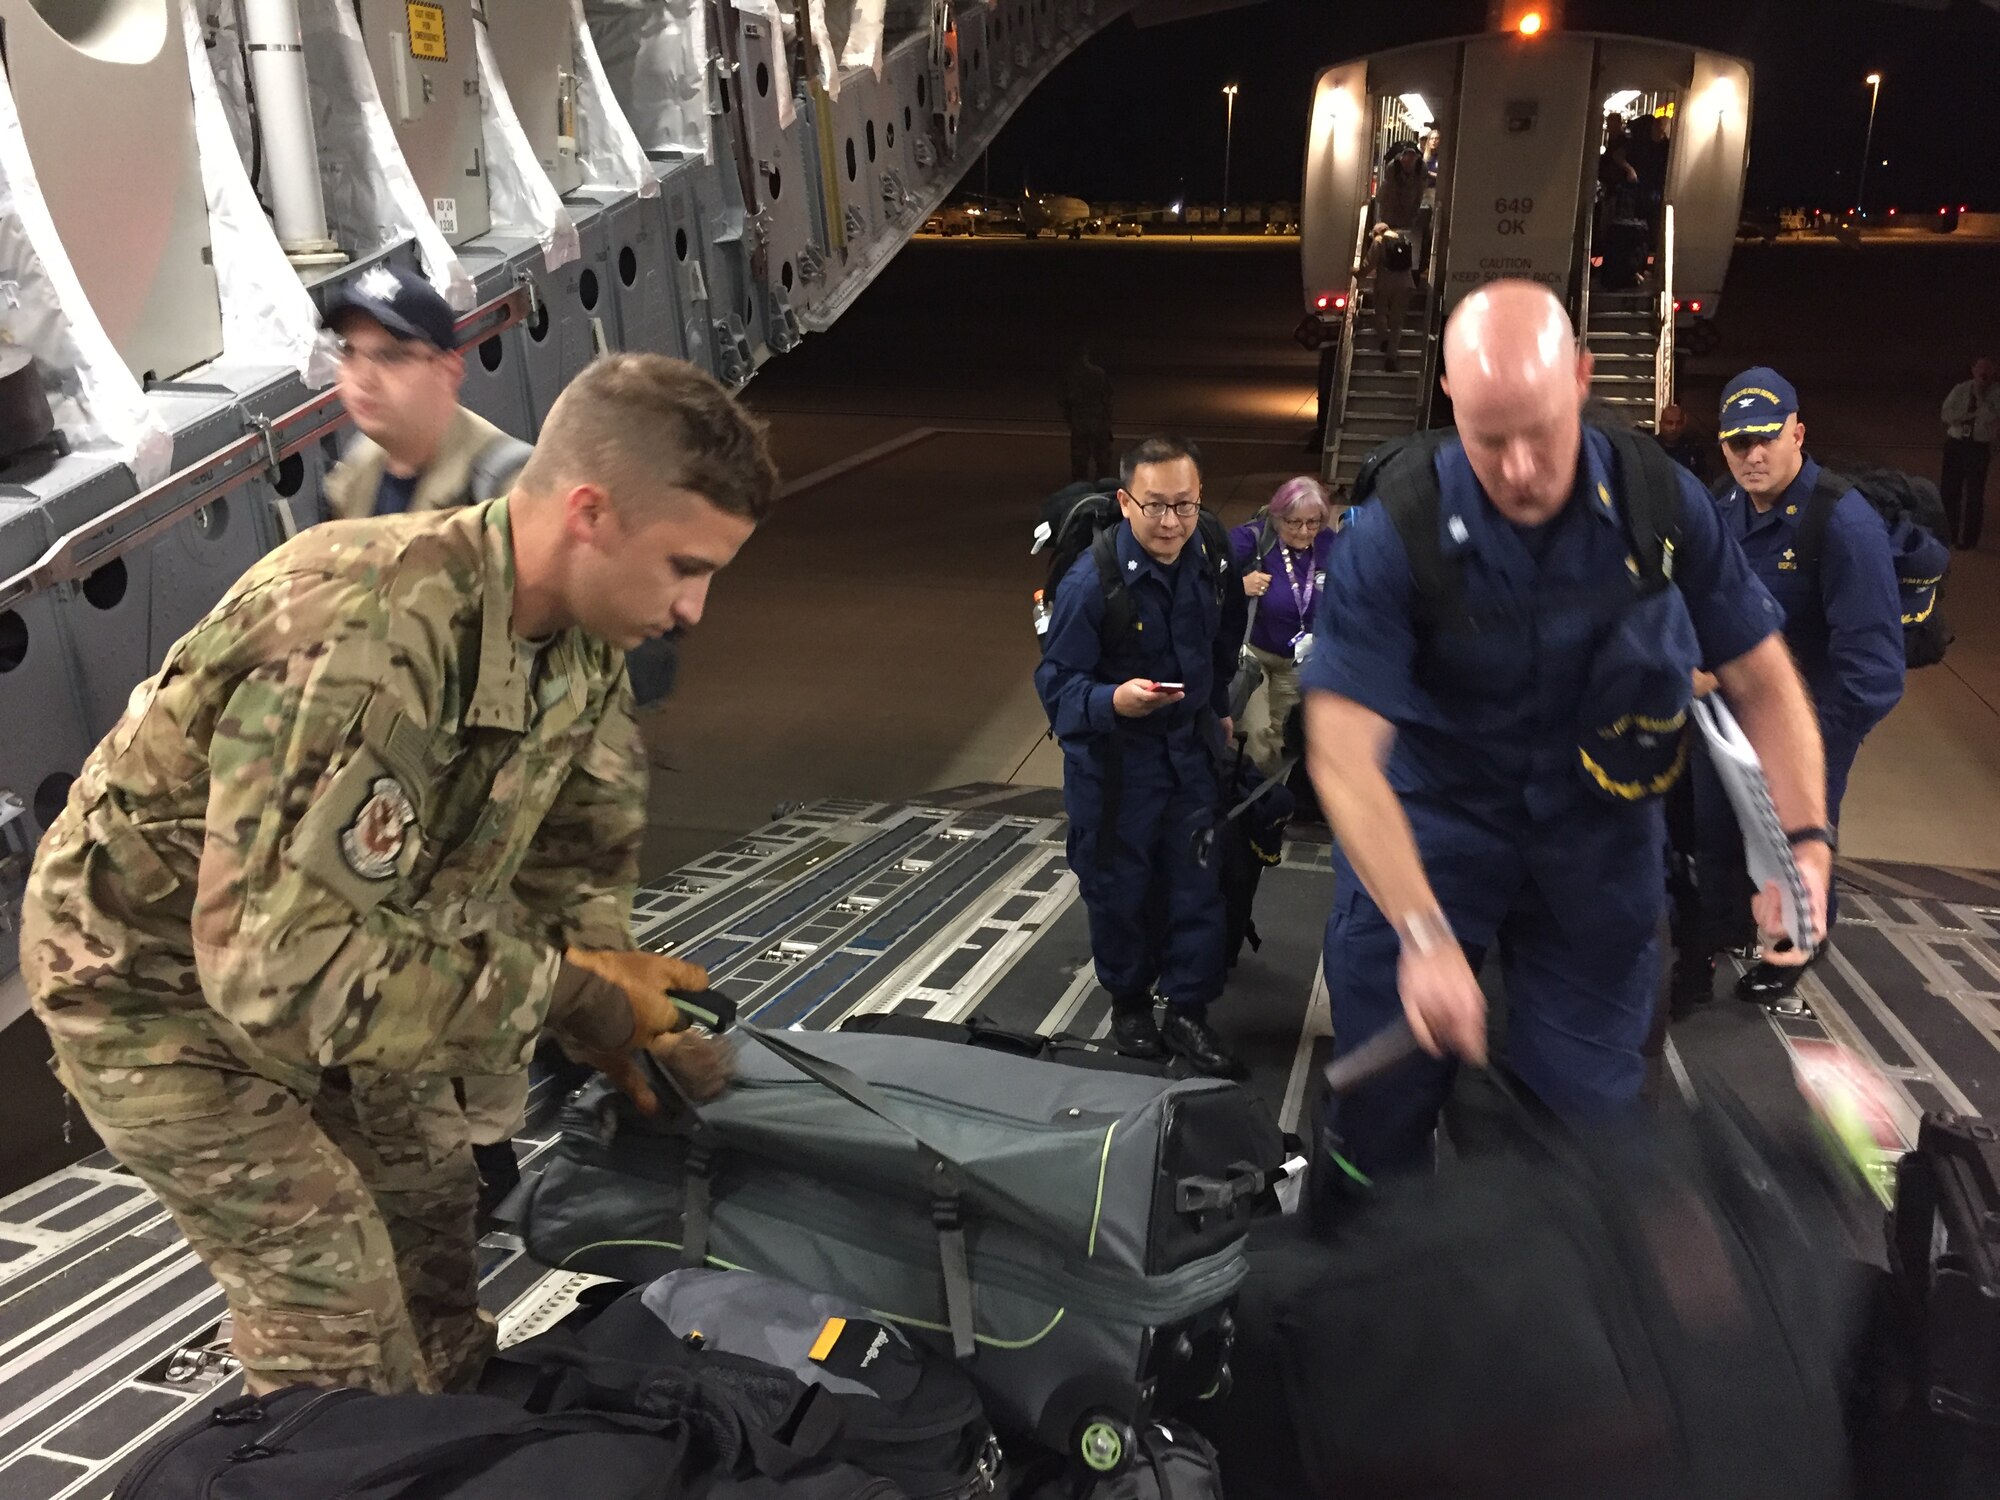 Staff Sgt. Rob Lummus, 15th Airlift Squadron loadmaster, helps medical professionals from Health and Human Services load baggage on a flight from Dulles International  Airport, Washington D.C., to Orlando, Florida, Sept. 9. The mission supported HHS as they coordinate the federal medical and public health medical support to the state of  Florida. Lummus' first exposure to a C-17 came when he was 17-years old volunteering during Hurricane Katrina.